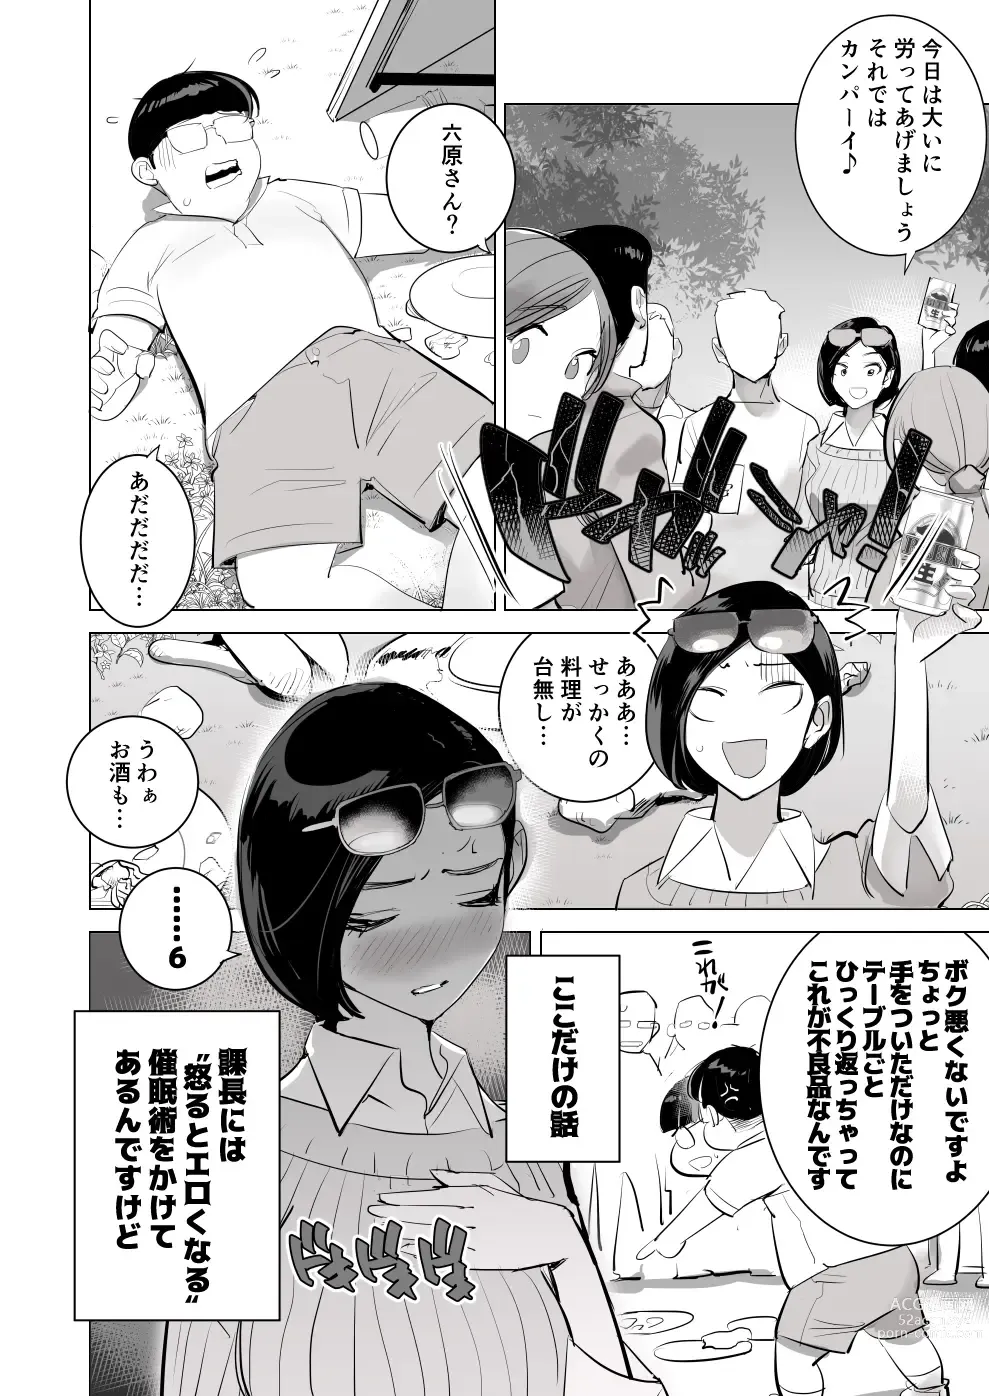 Page 5 of doujinshi Section Leader